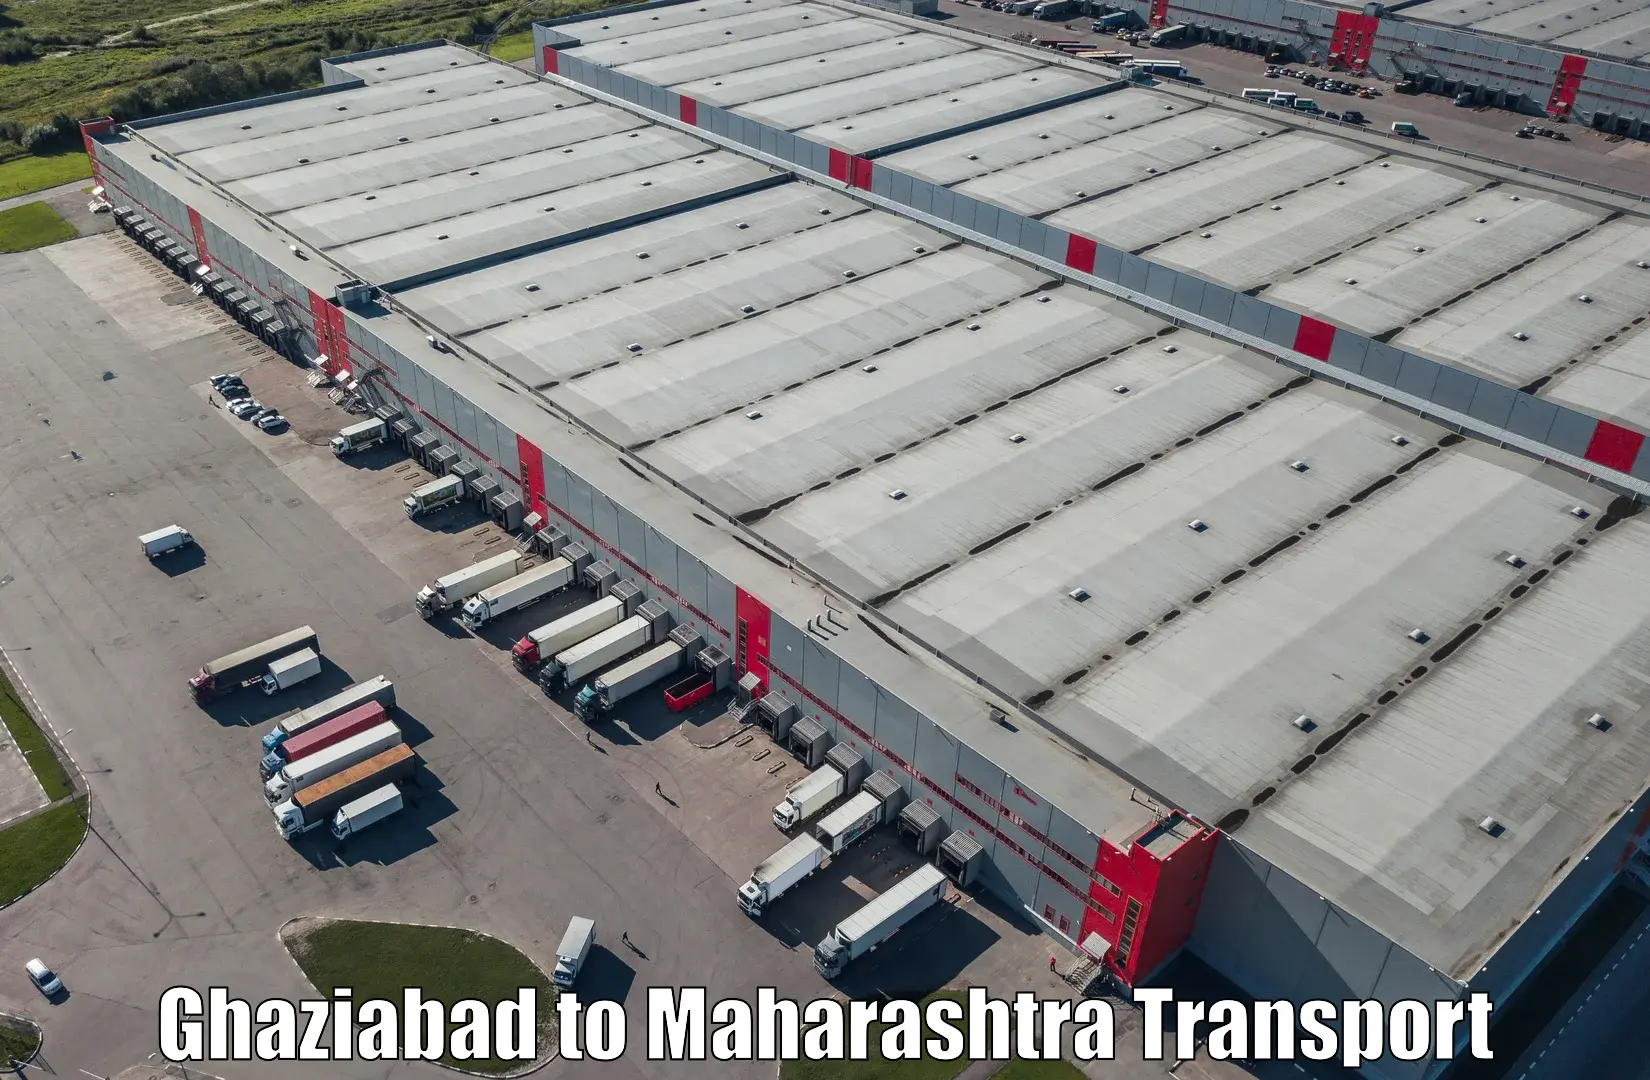 Logistics transportation services Ghaziabad to Pune